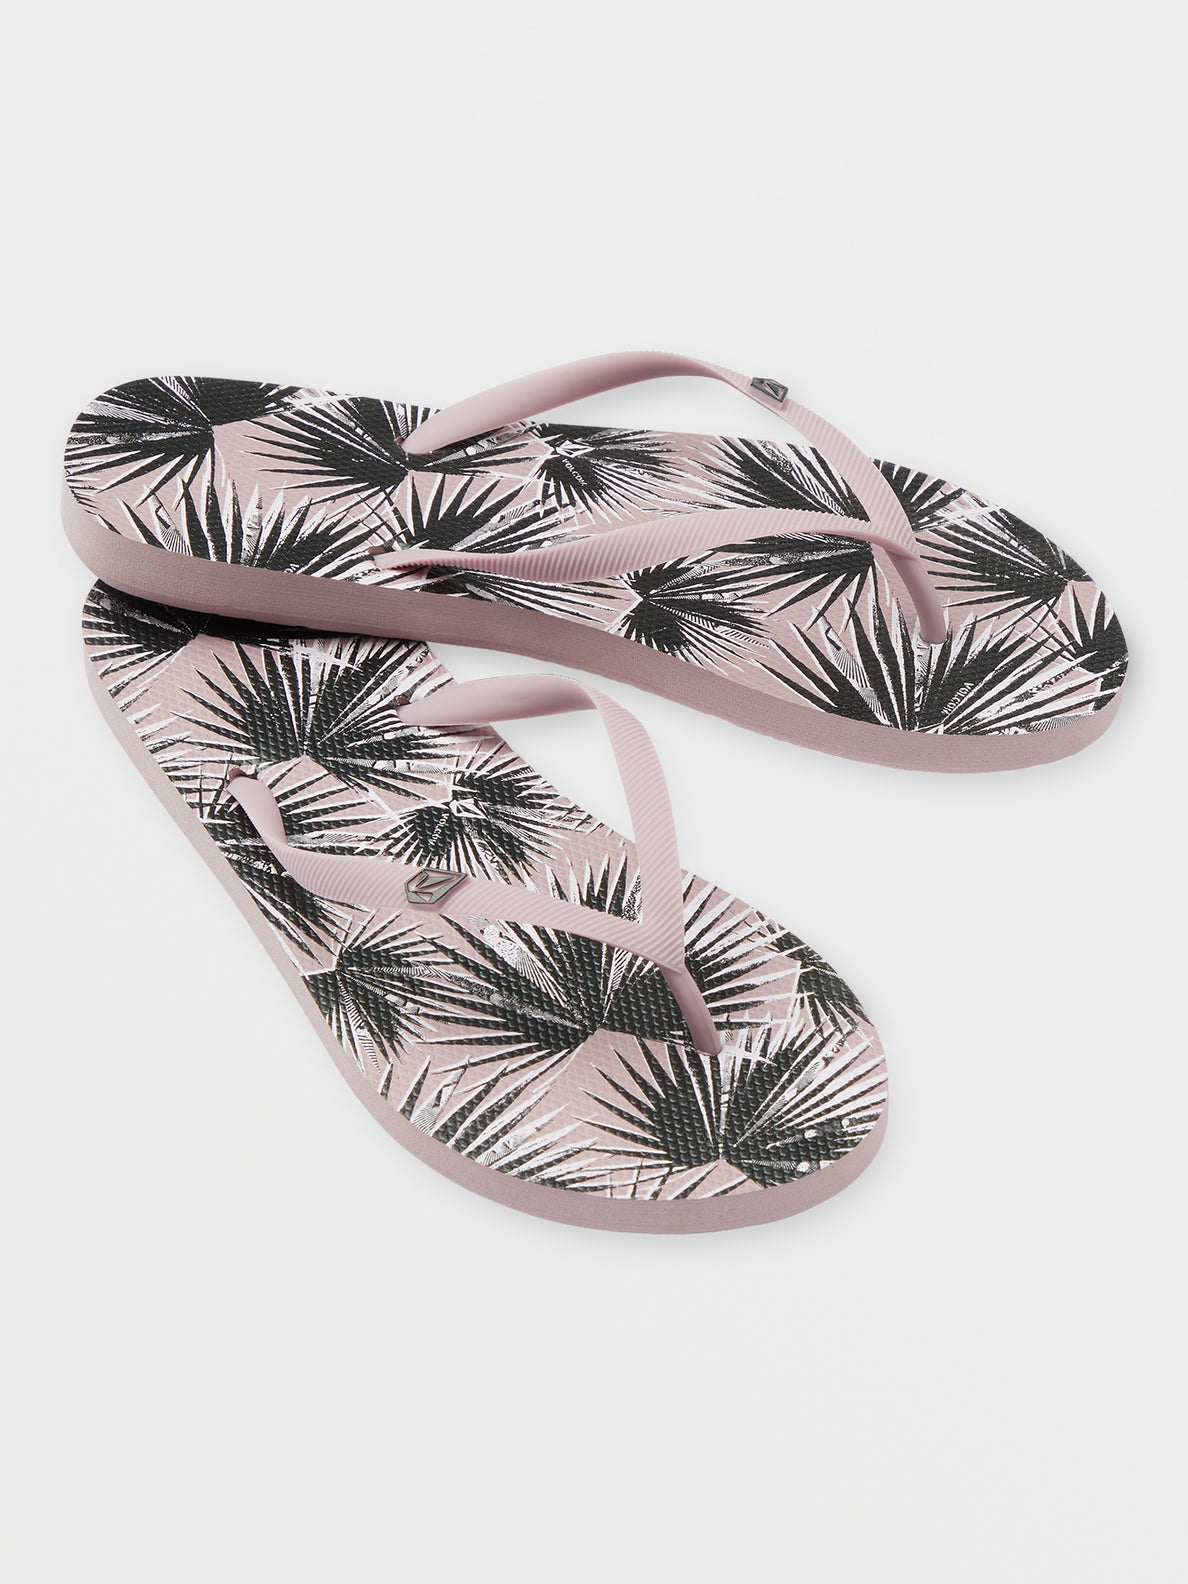 Rocking Solid Sandals - Faded Mauve